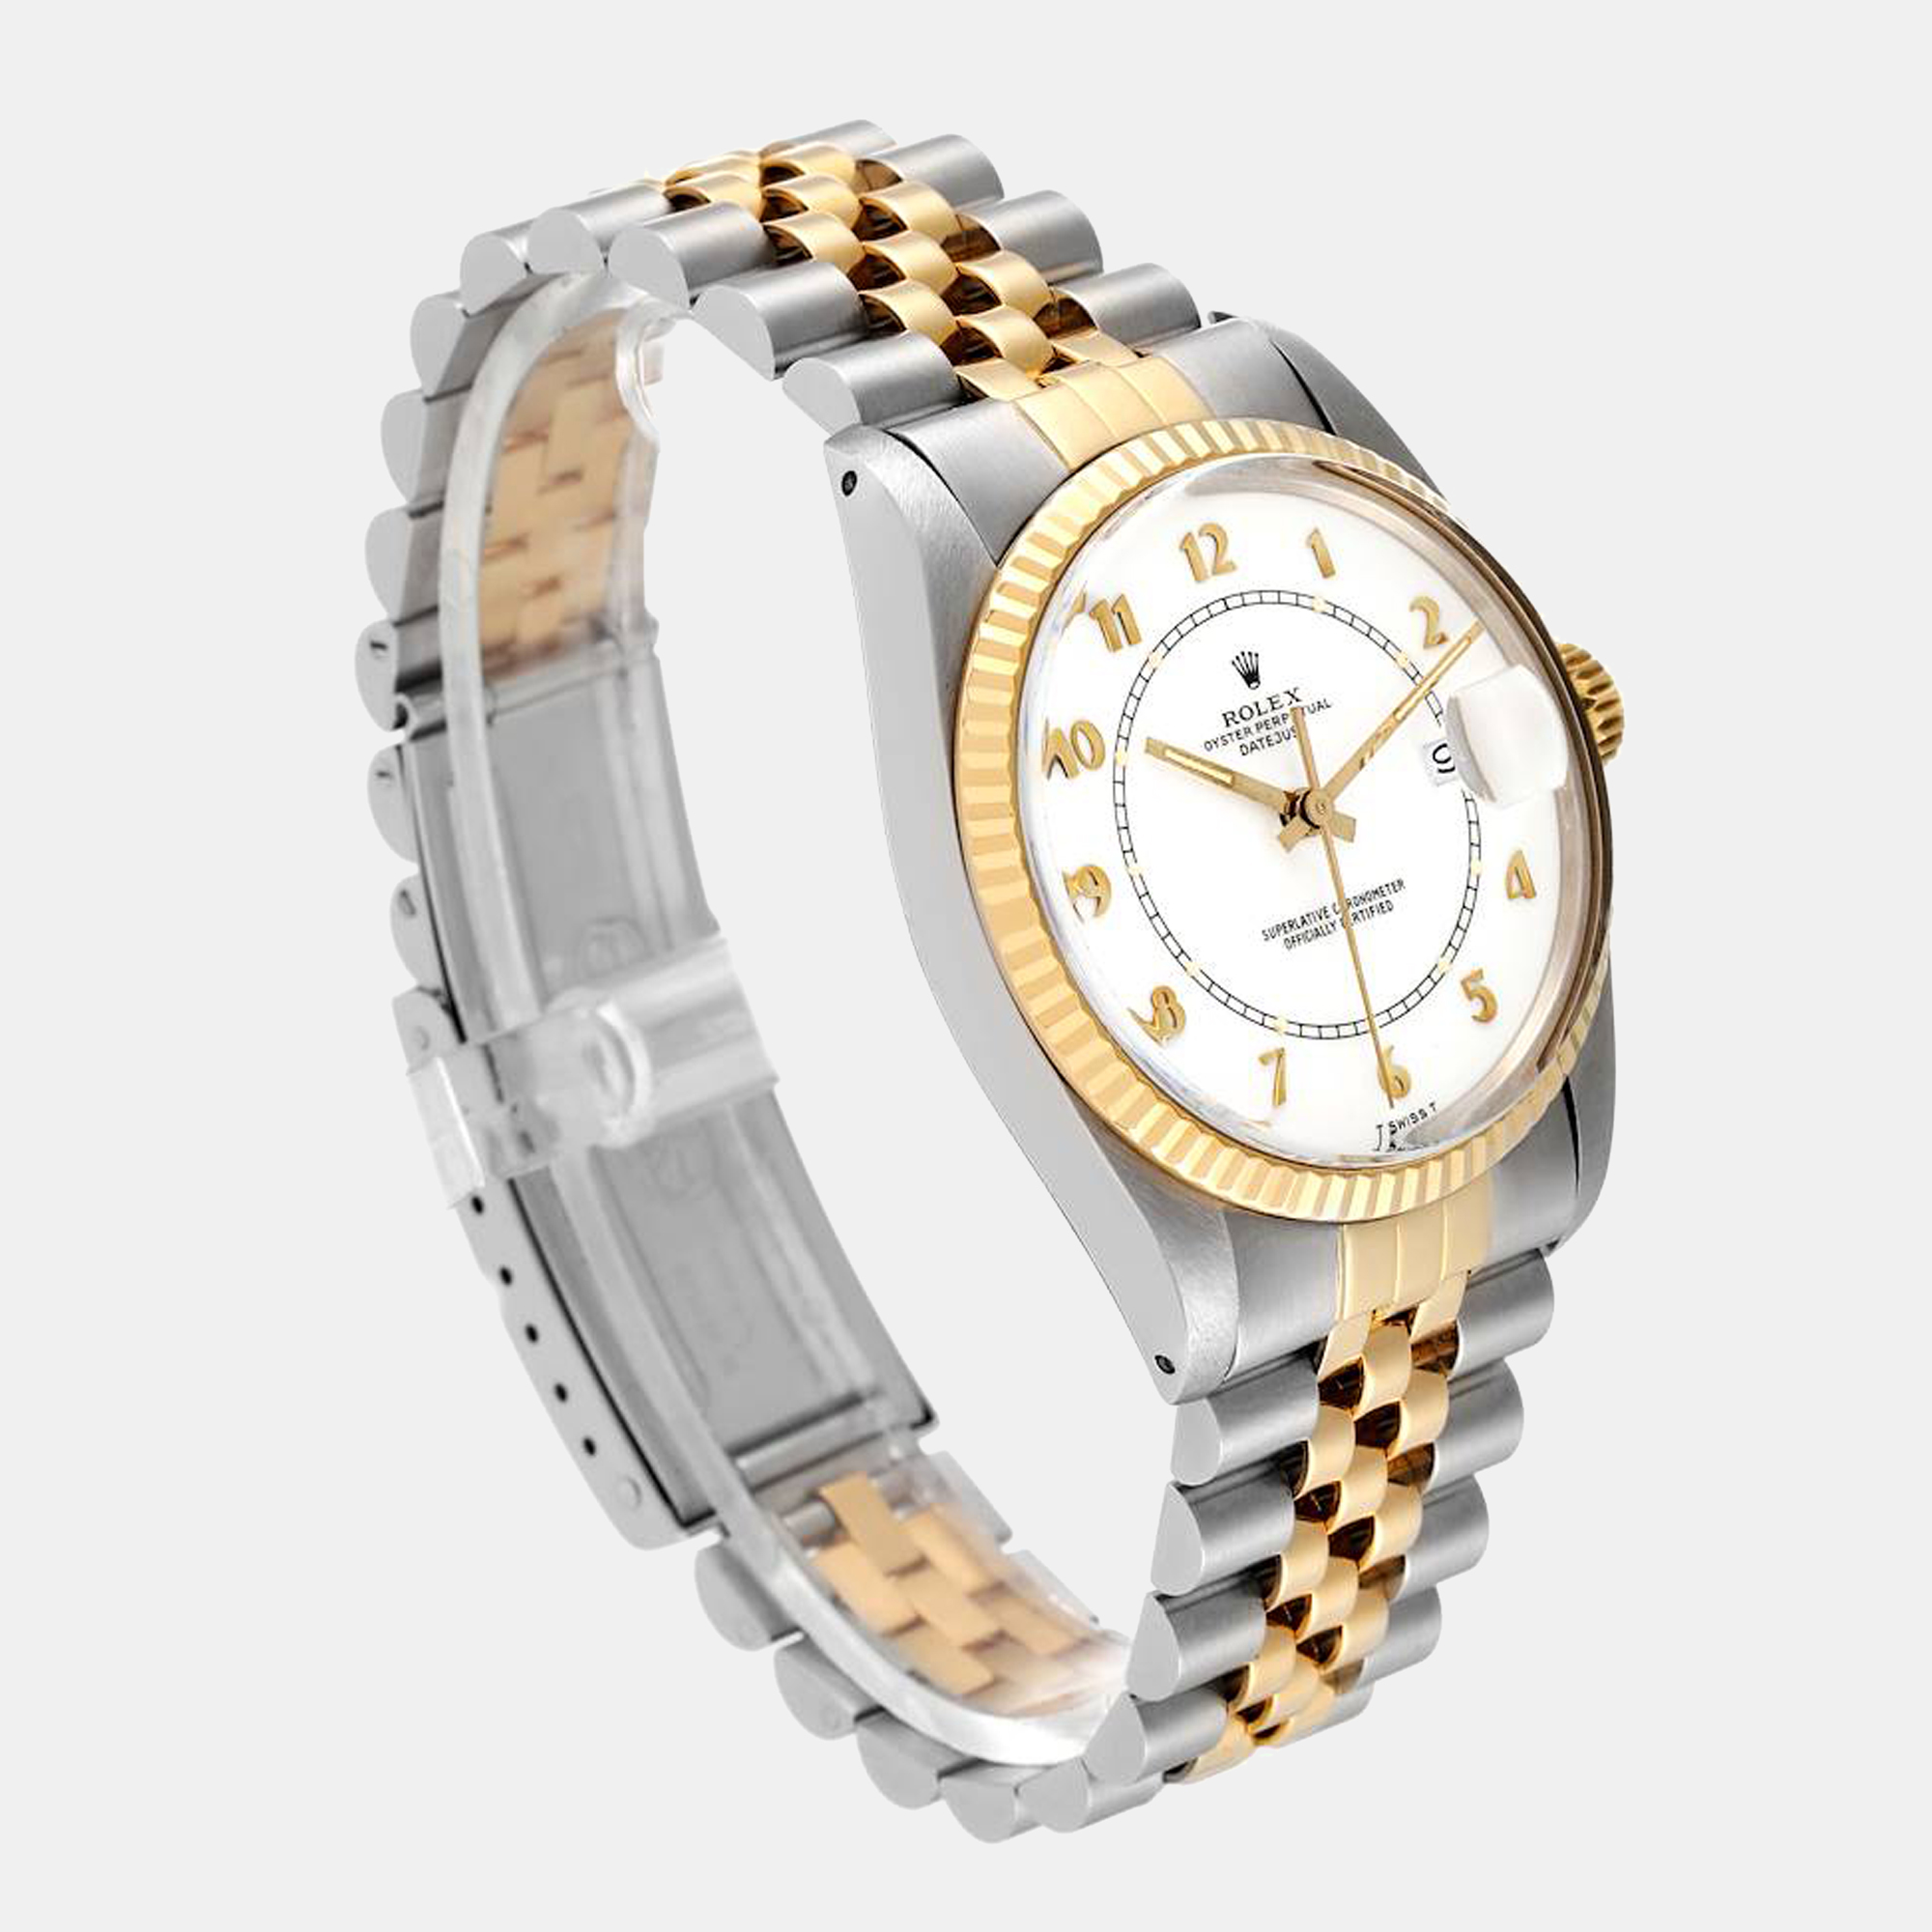 Rolex White 18k Yellow Gold And Stainless Steel Datejust 16013 Automatic Men's Wristwatch 36 Mm